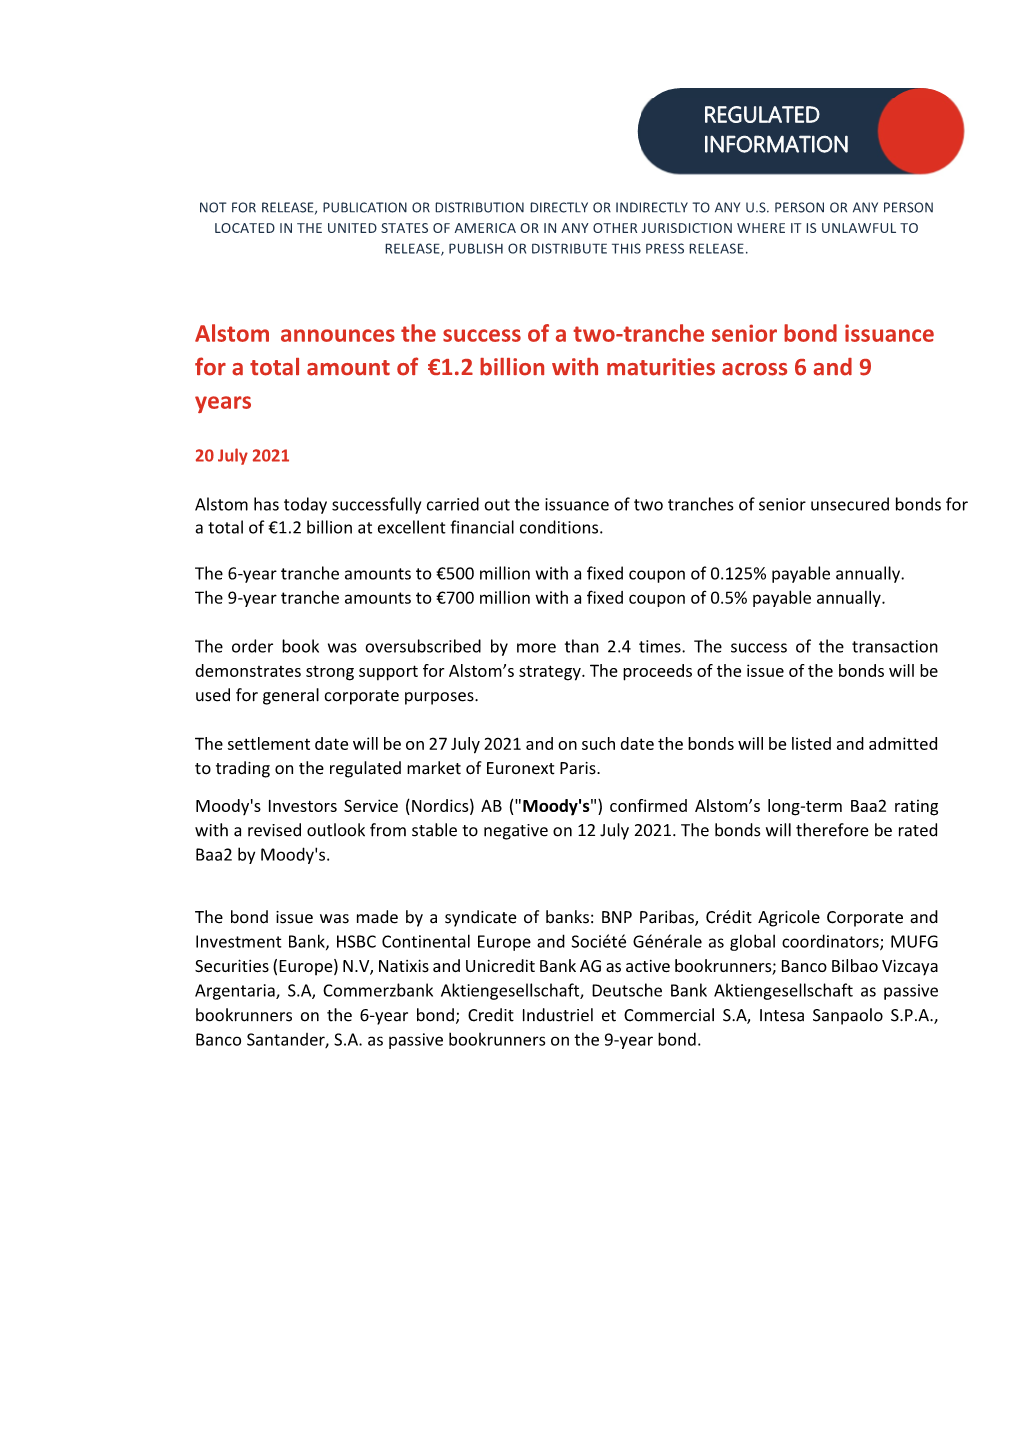 Alstom Announces the Success of a Two-Tranche Senior Bond Issuance for a Total Amount of €1.2 Billion with Maturities Across 6 and 9 Years